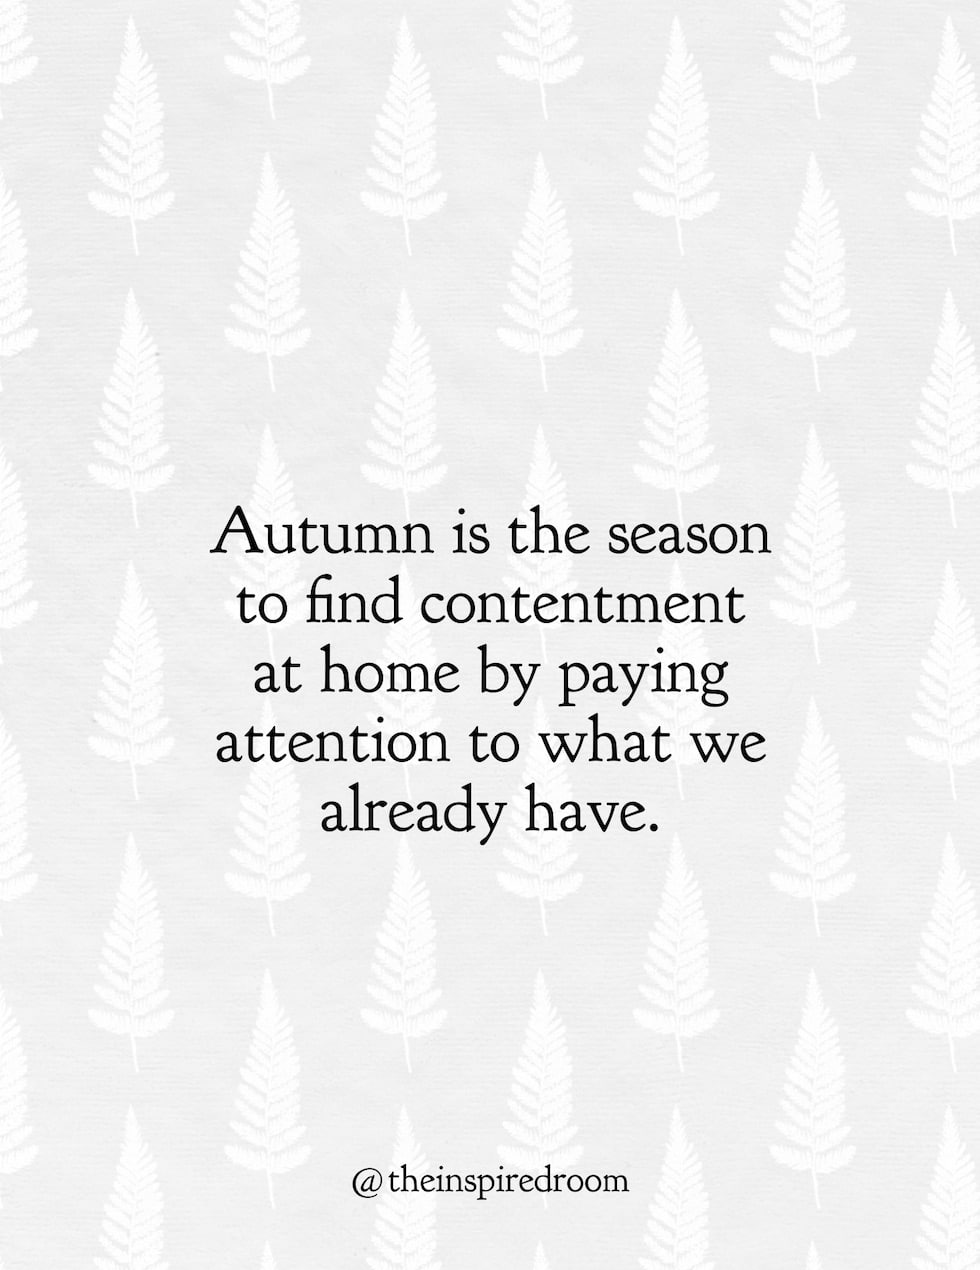 How to Create an Autumn Mindset for Your Home (and why social media is distracting us)